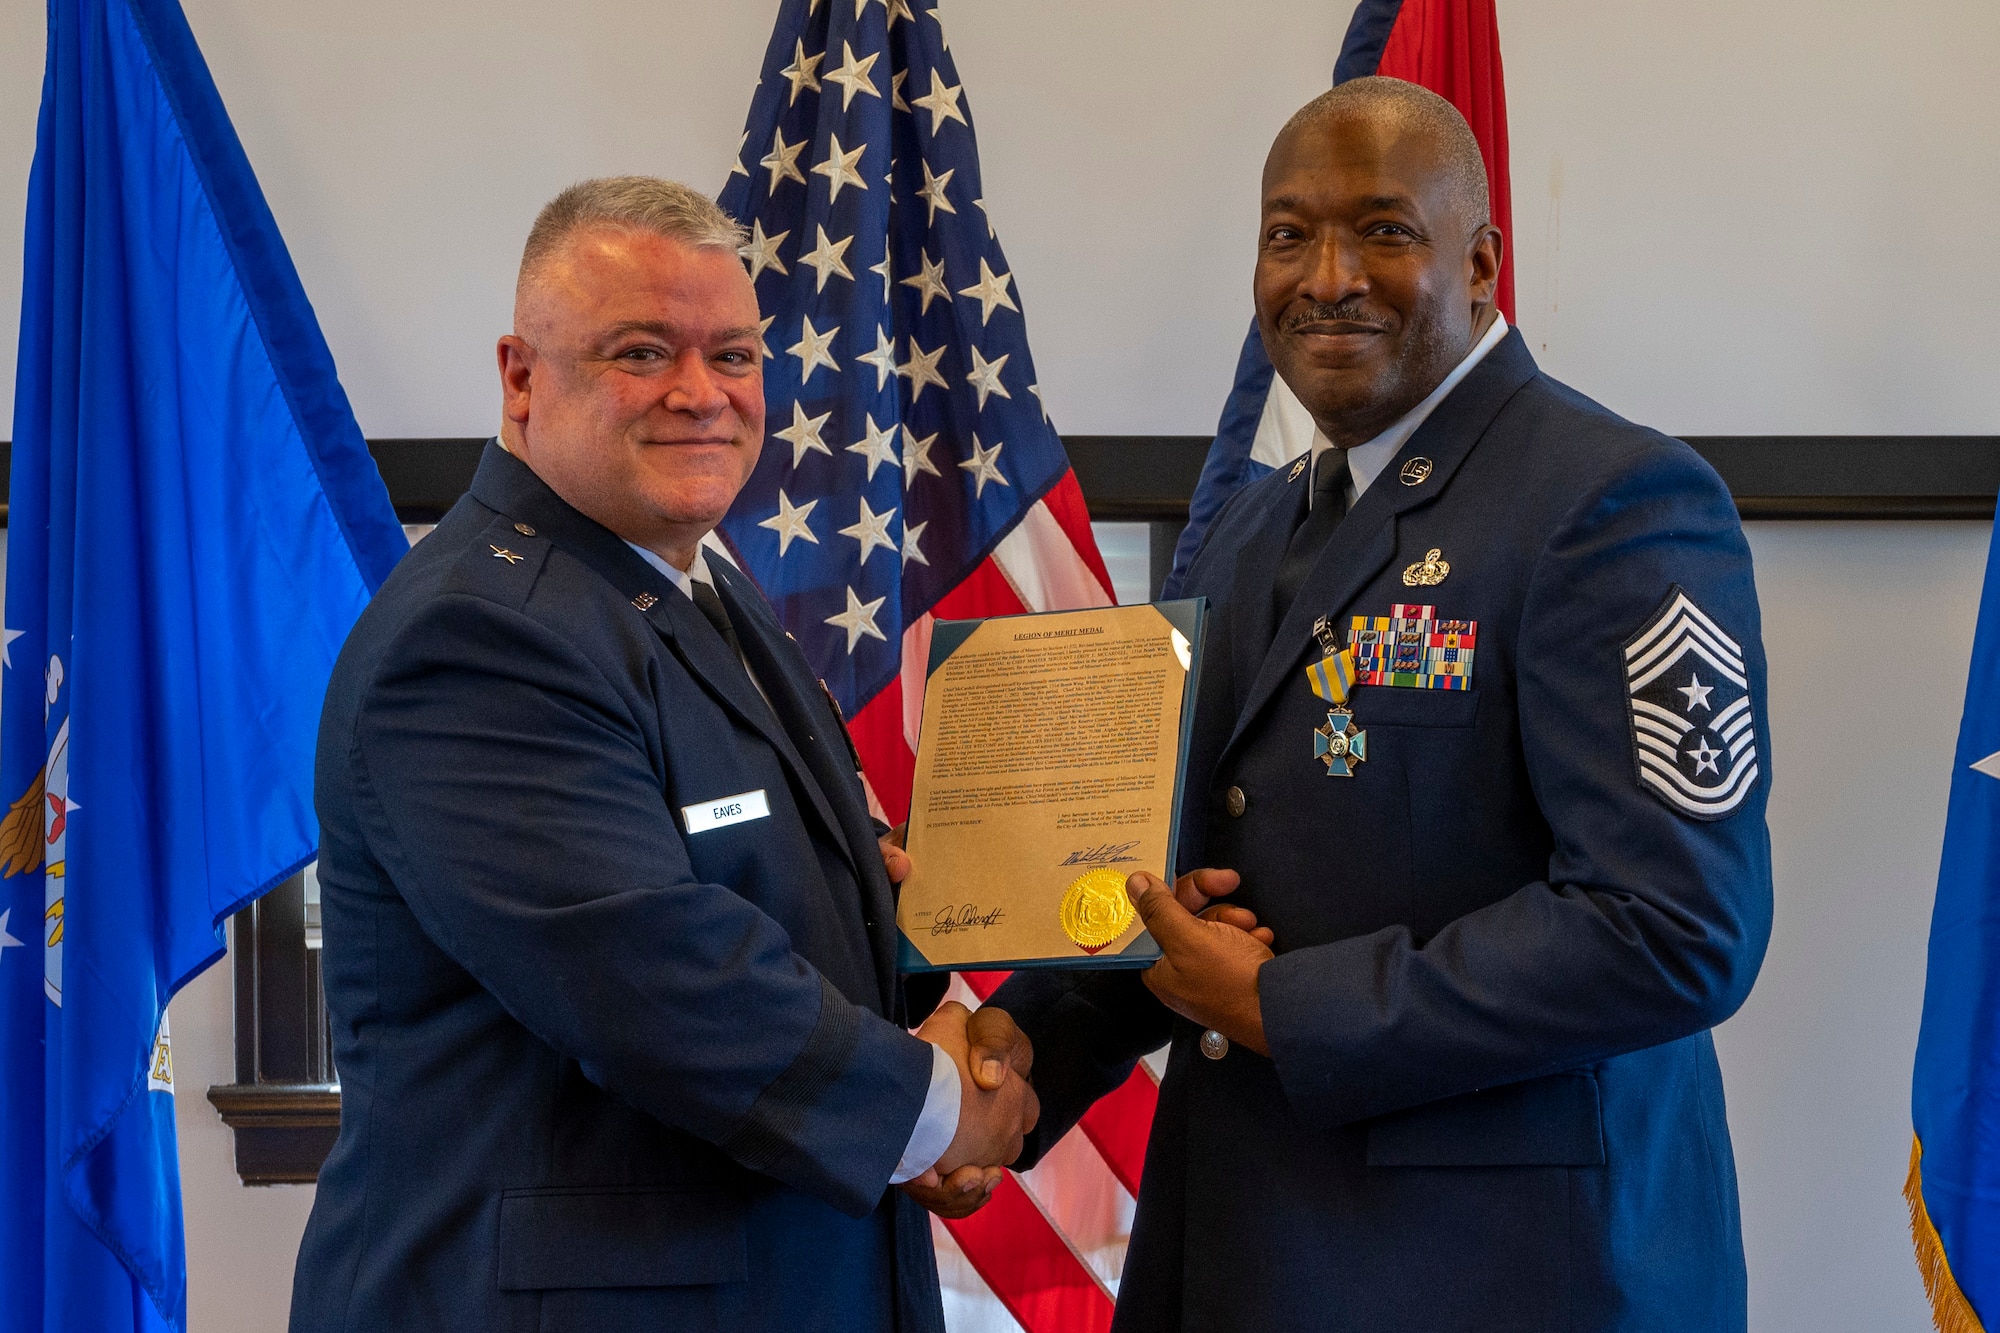 Chief Master Sgt. LeRoy E. McCardell Jr., right, 131st Bomb Wing command chief master sergeant, stands with Brig. Gen. Kenneth S. Eaves, Assistant Adjutant General- Air, Missouri National Guard, during his retirement ceremony, June 25, 2022, at Jefferson Barracks Air National Guard Base, St. Louis, Missouri. McCardell served for 34 years. (U.S. Air National Guard photo by Senior Airman Whitney Erhart)